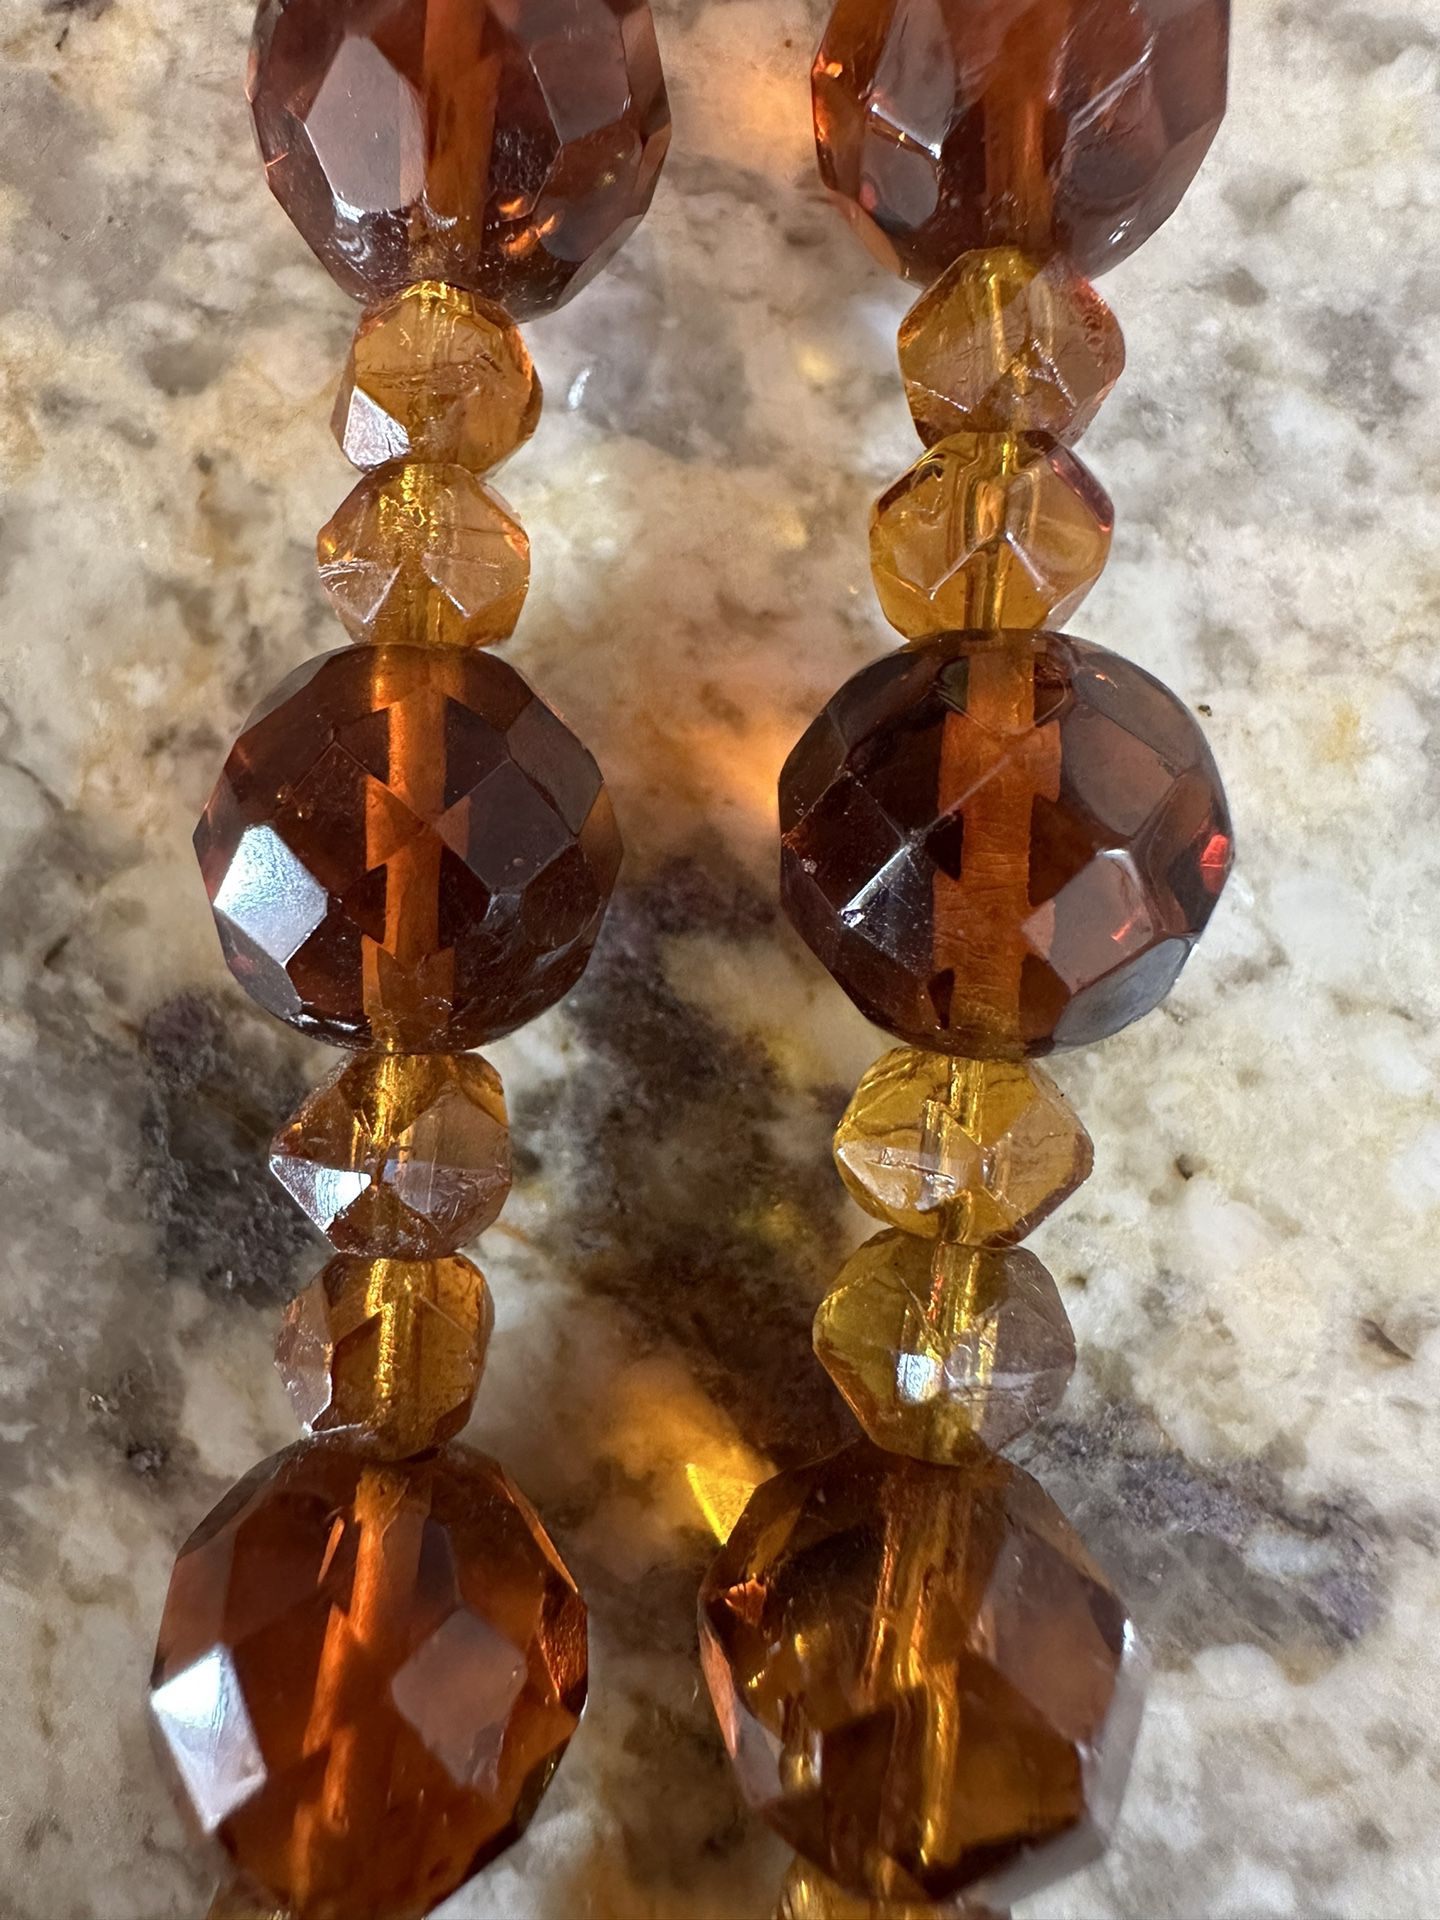 Glass Amber Beaded Necklace 